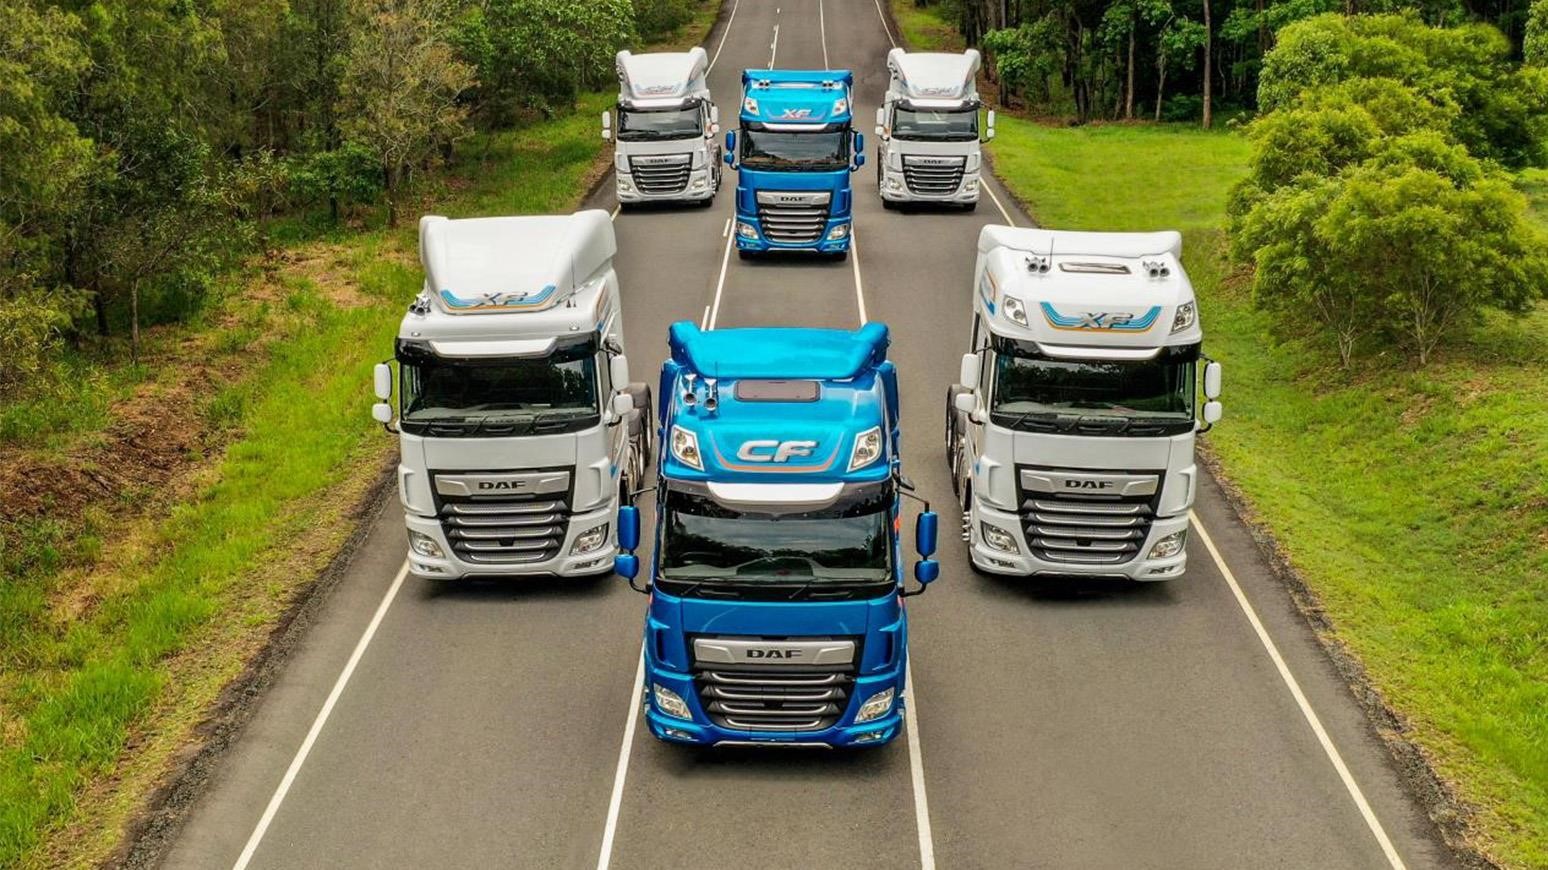 DAF Wins Good Design Awards For Its Ergonomic, Durable & Sustainable CF & XF Truck Ranges